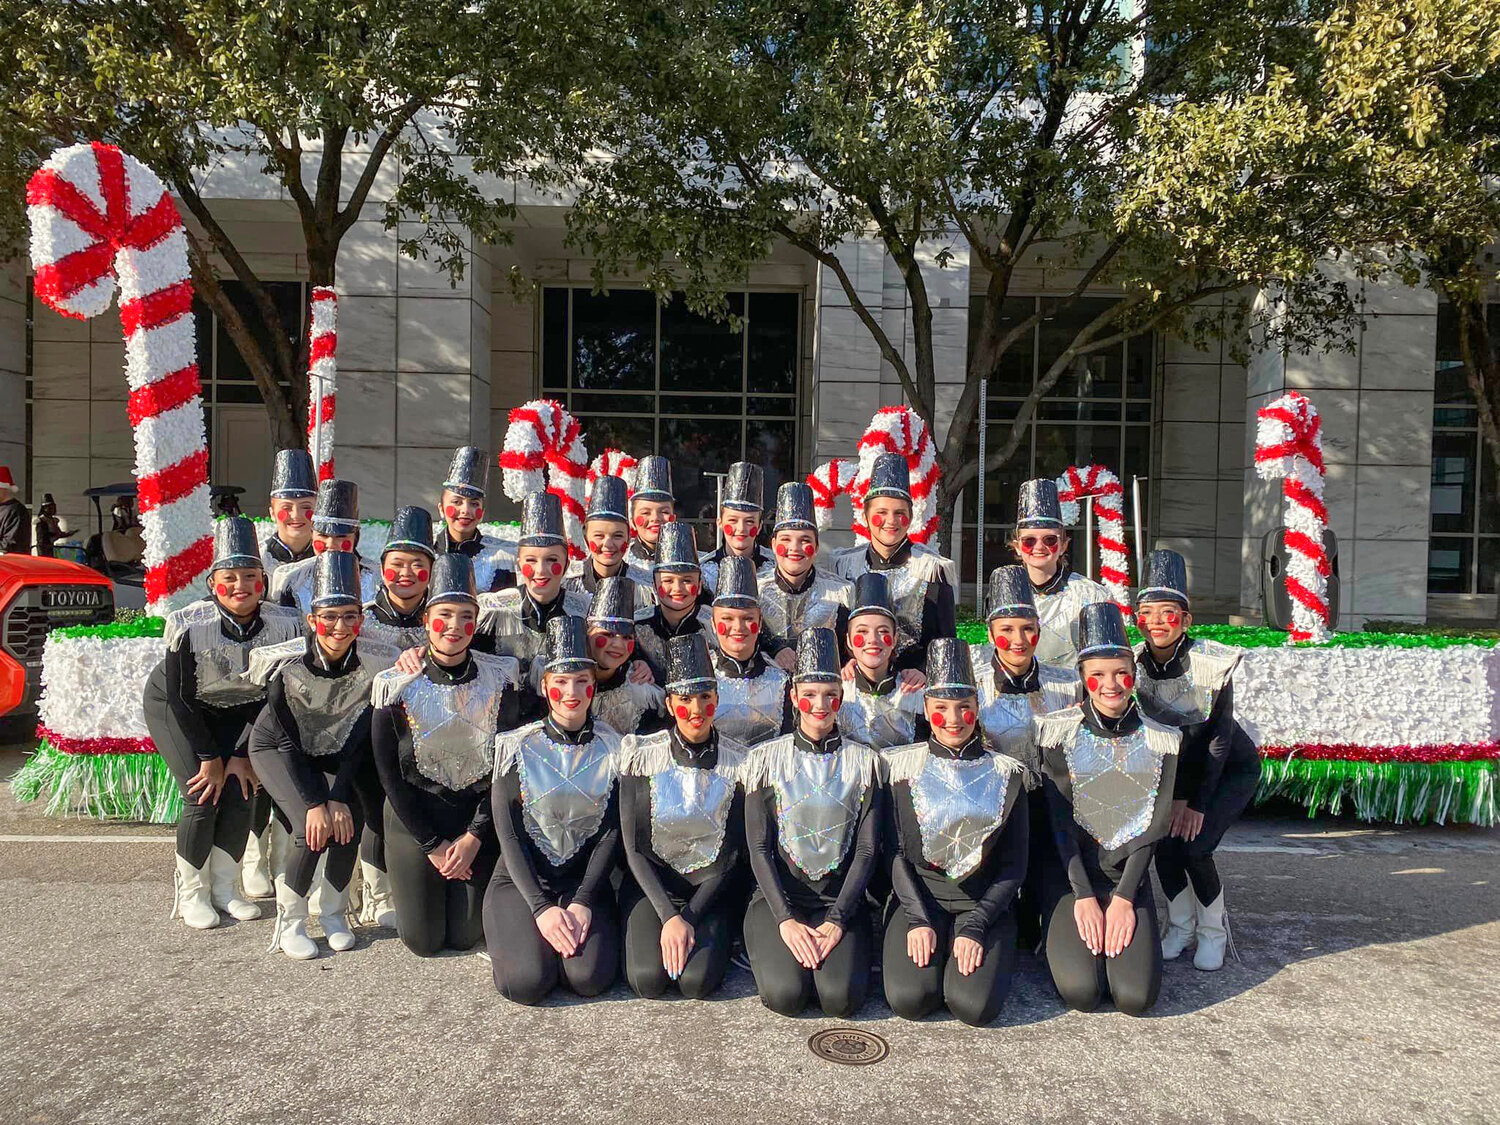 The Granbury High School Stowaways drill and dance team performed last year as toy soldiers in the Dallas Holiday Parade. The team was recently welcomed back for the third year in a row to participate in the 2023 parade.